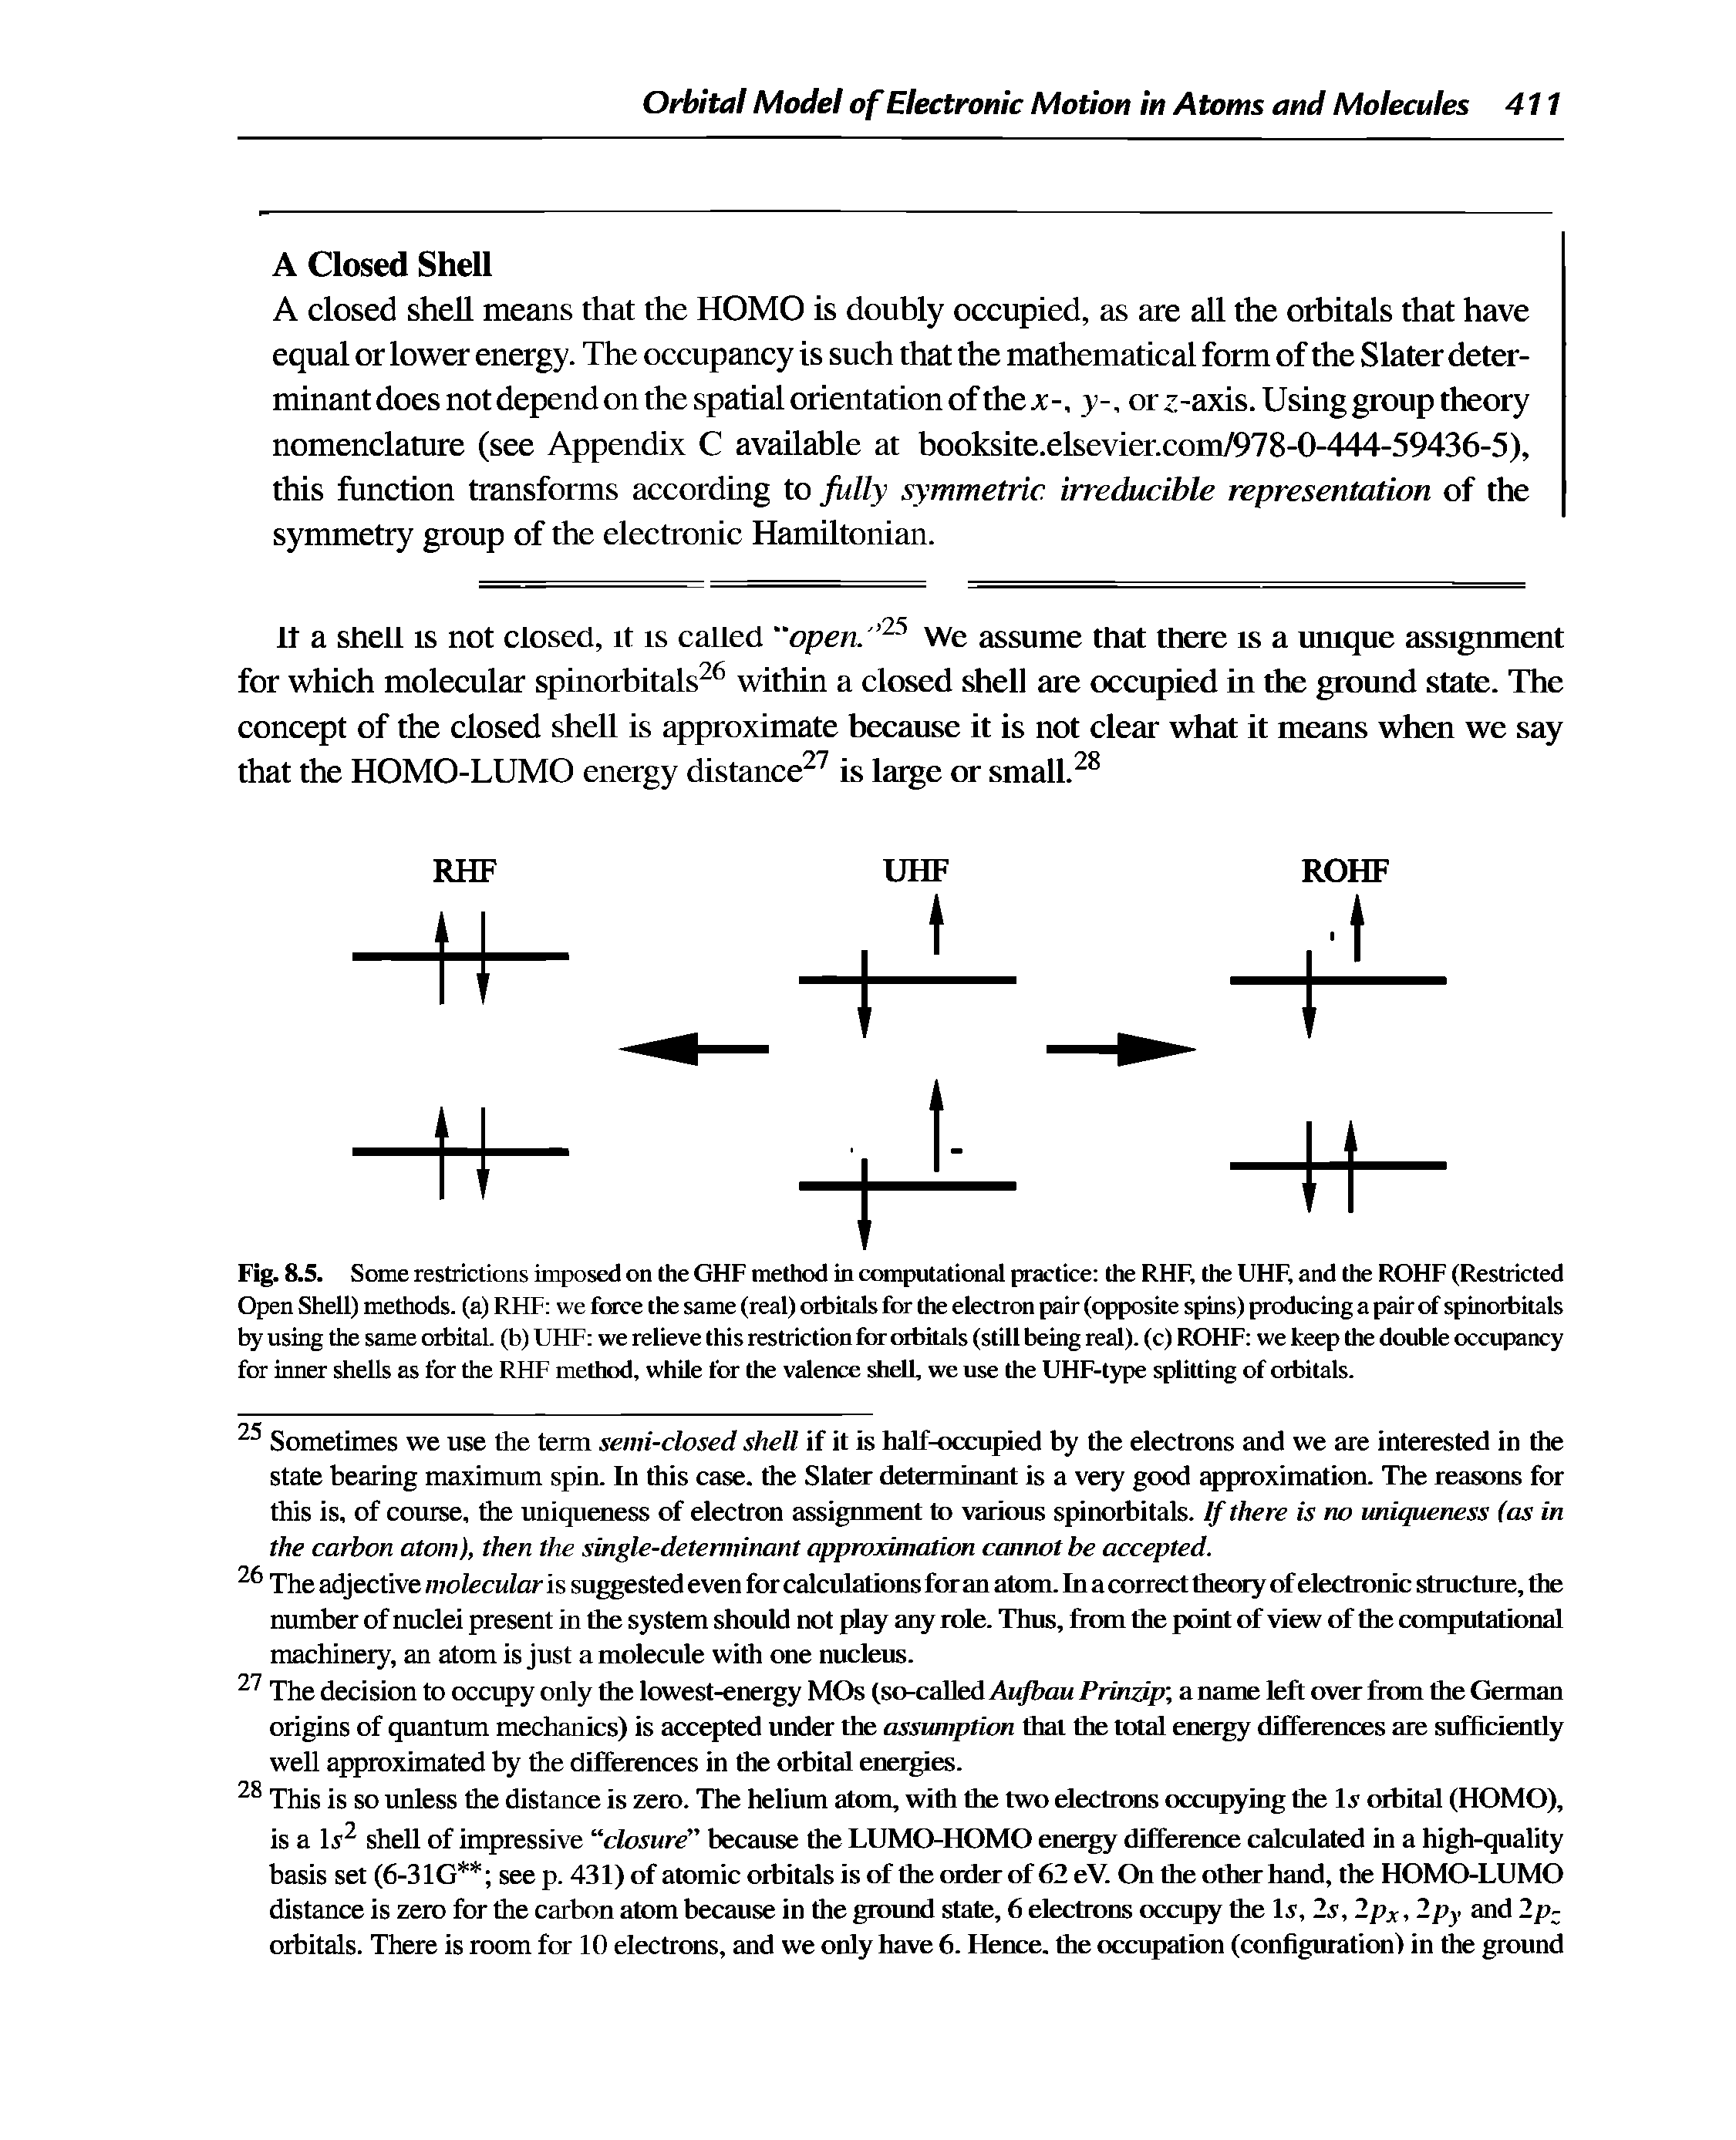 Fig. 8,5. Some restrictions imposed on the GHF method in computational practice the RHF, the UHF, and the ROHF (Restricted Open Shell) methods, (a) RHF we frace the same (real) orbitals for the elearon pair (opposite s[ s) producing a pair of spinorbitals by using the same orbital, (b) UHF we relieve this restriction for oibitals (still being real), (c) ROHF we keep the double occupancy for inner shells as for the RHF method, while for the valence shell, we use the UHF-type splitting of orbitals.